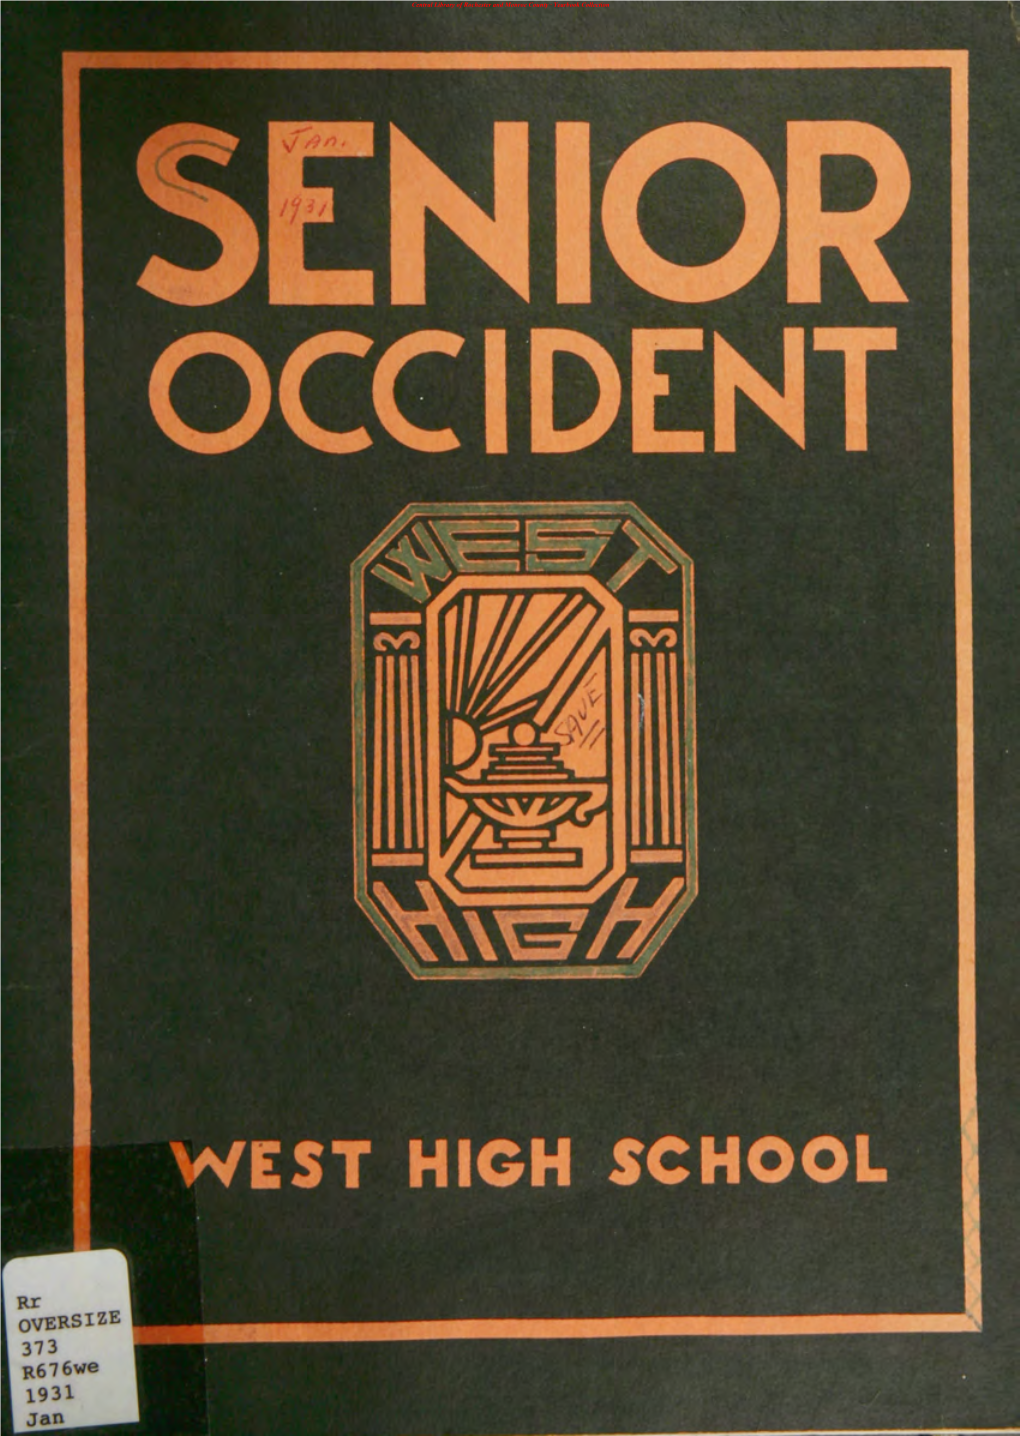 WEST HIGH SCHOOL Central Library of Rochester and Monroe County · Yearbook Collection